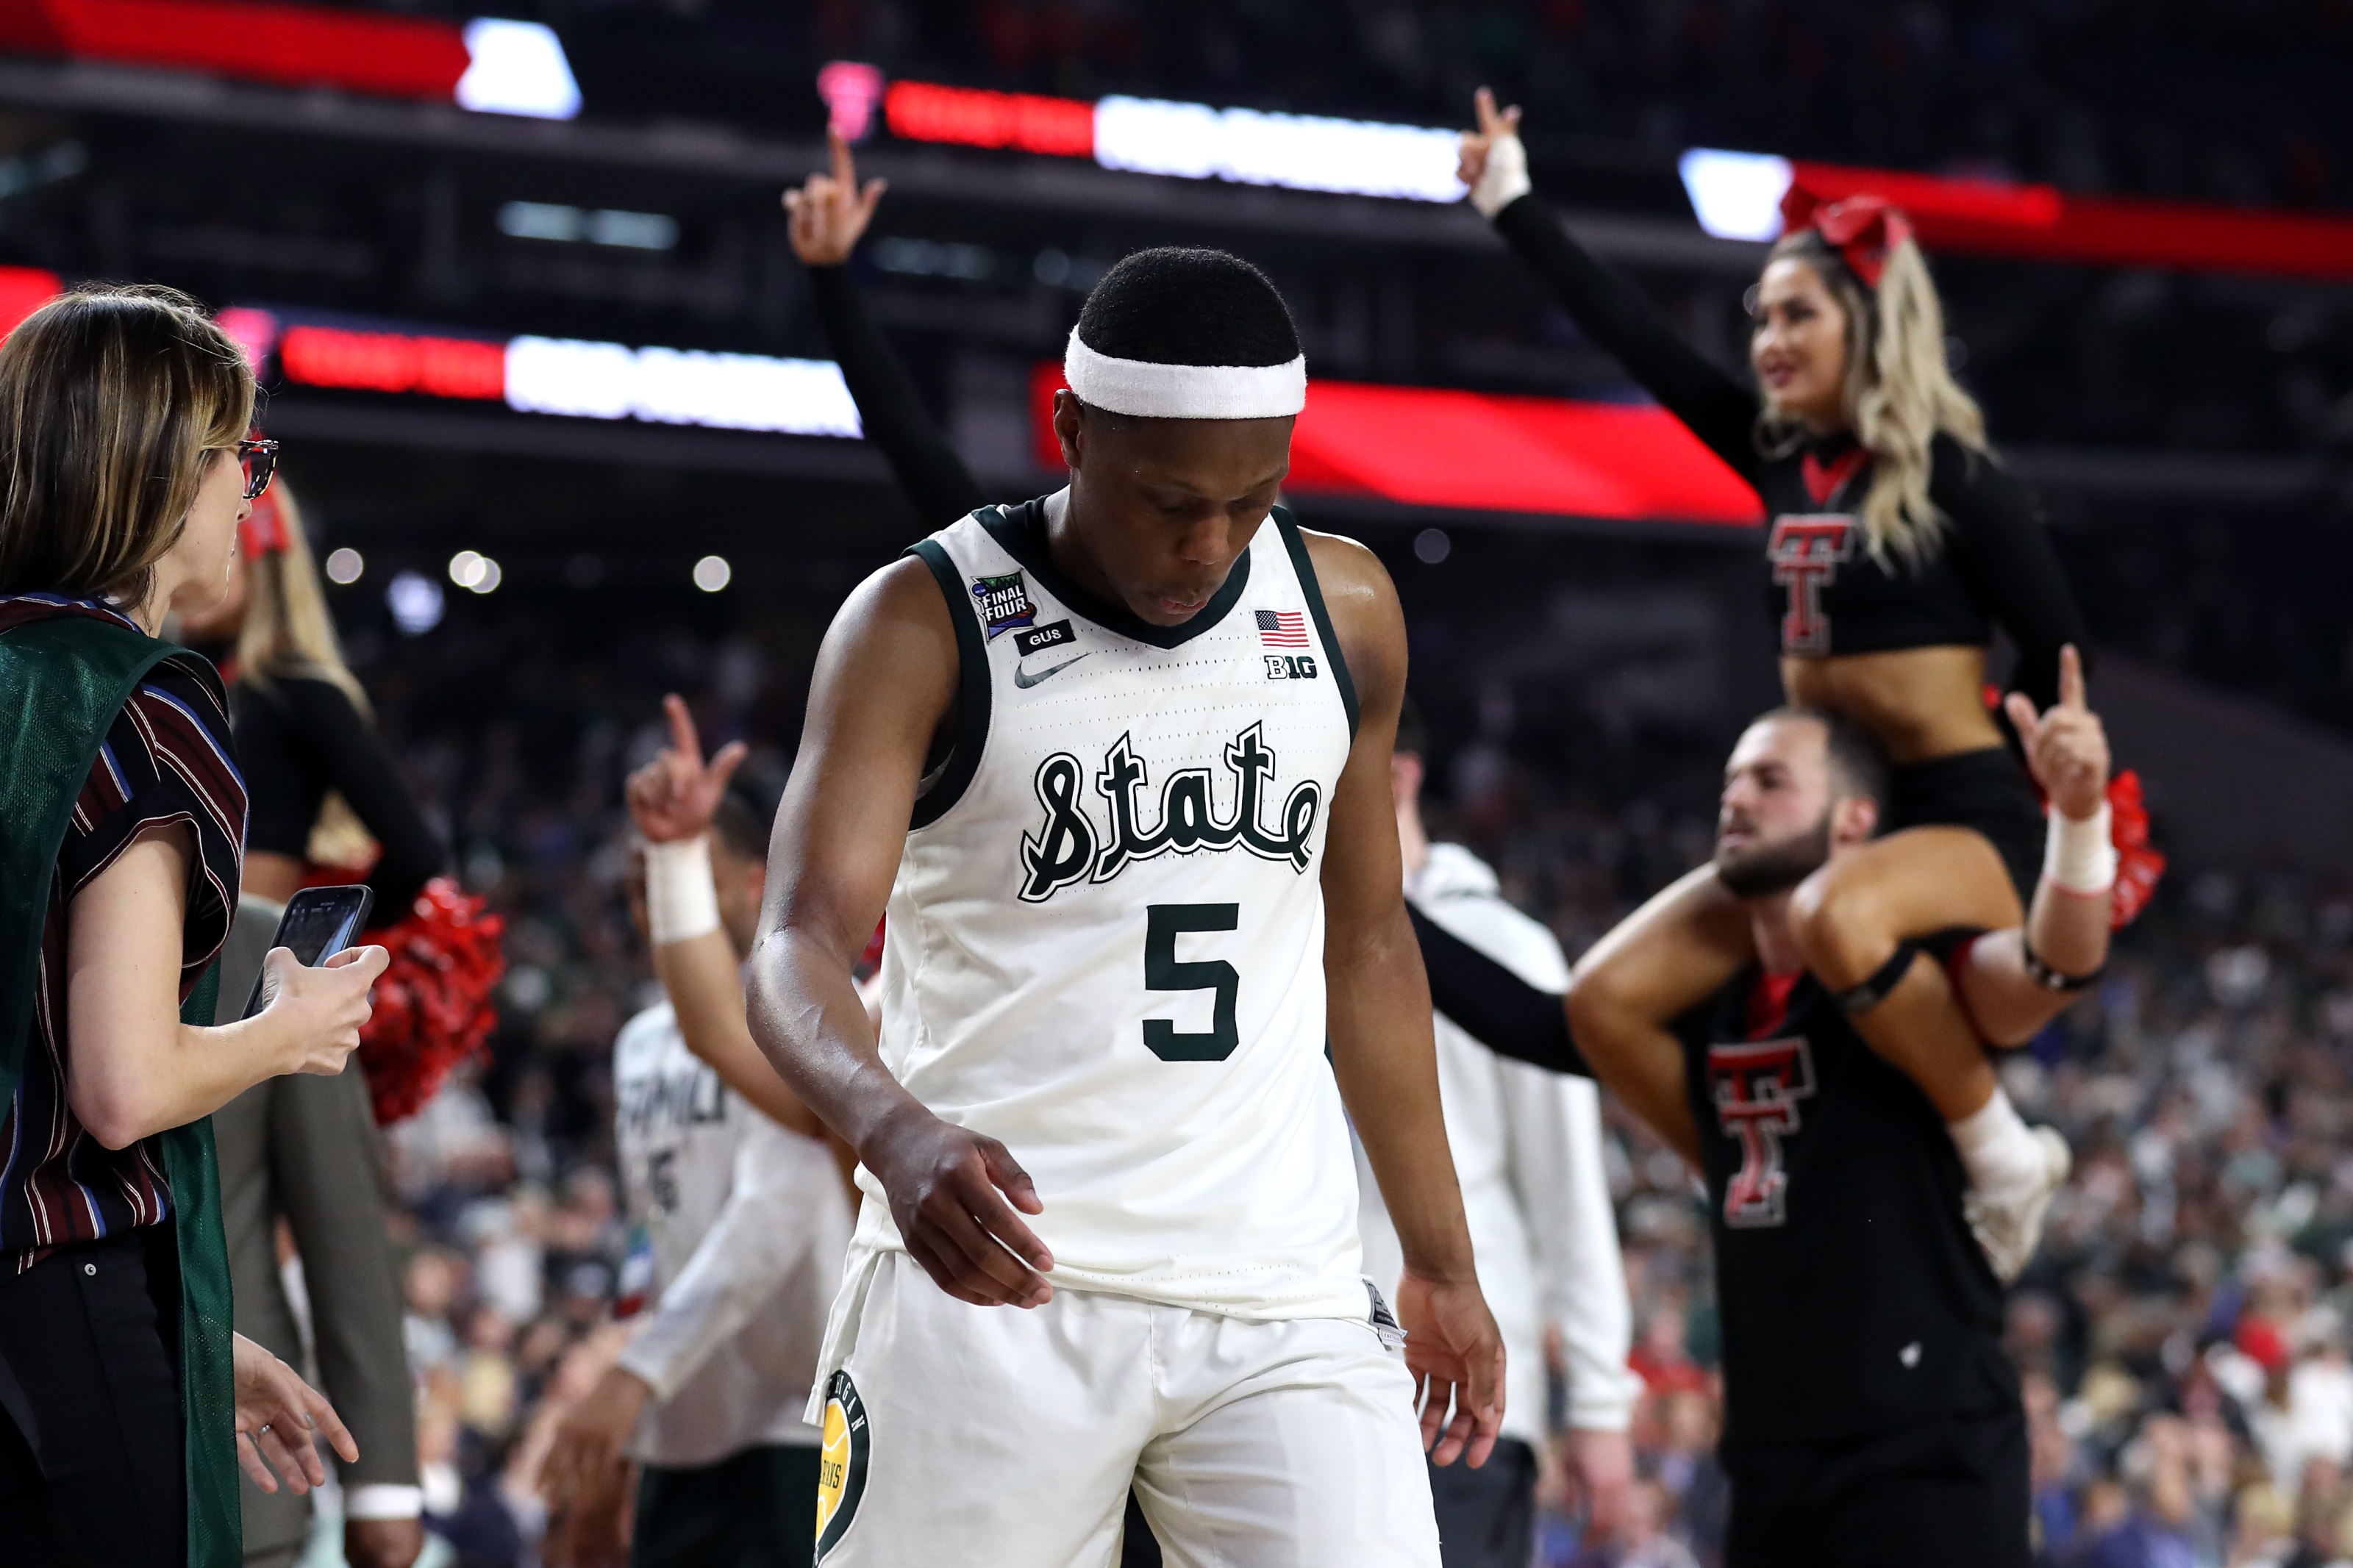 Michigan State's Run Ends With Loss To Texas Tech, 61-51